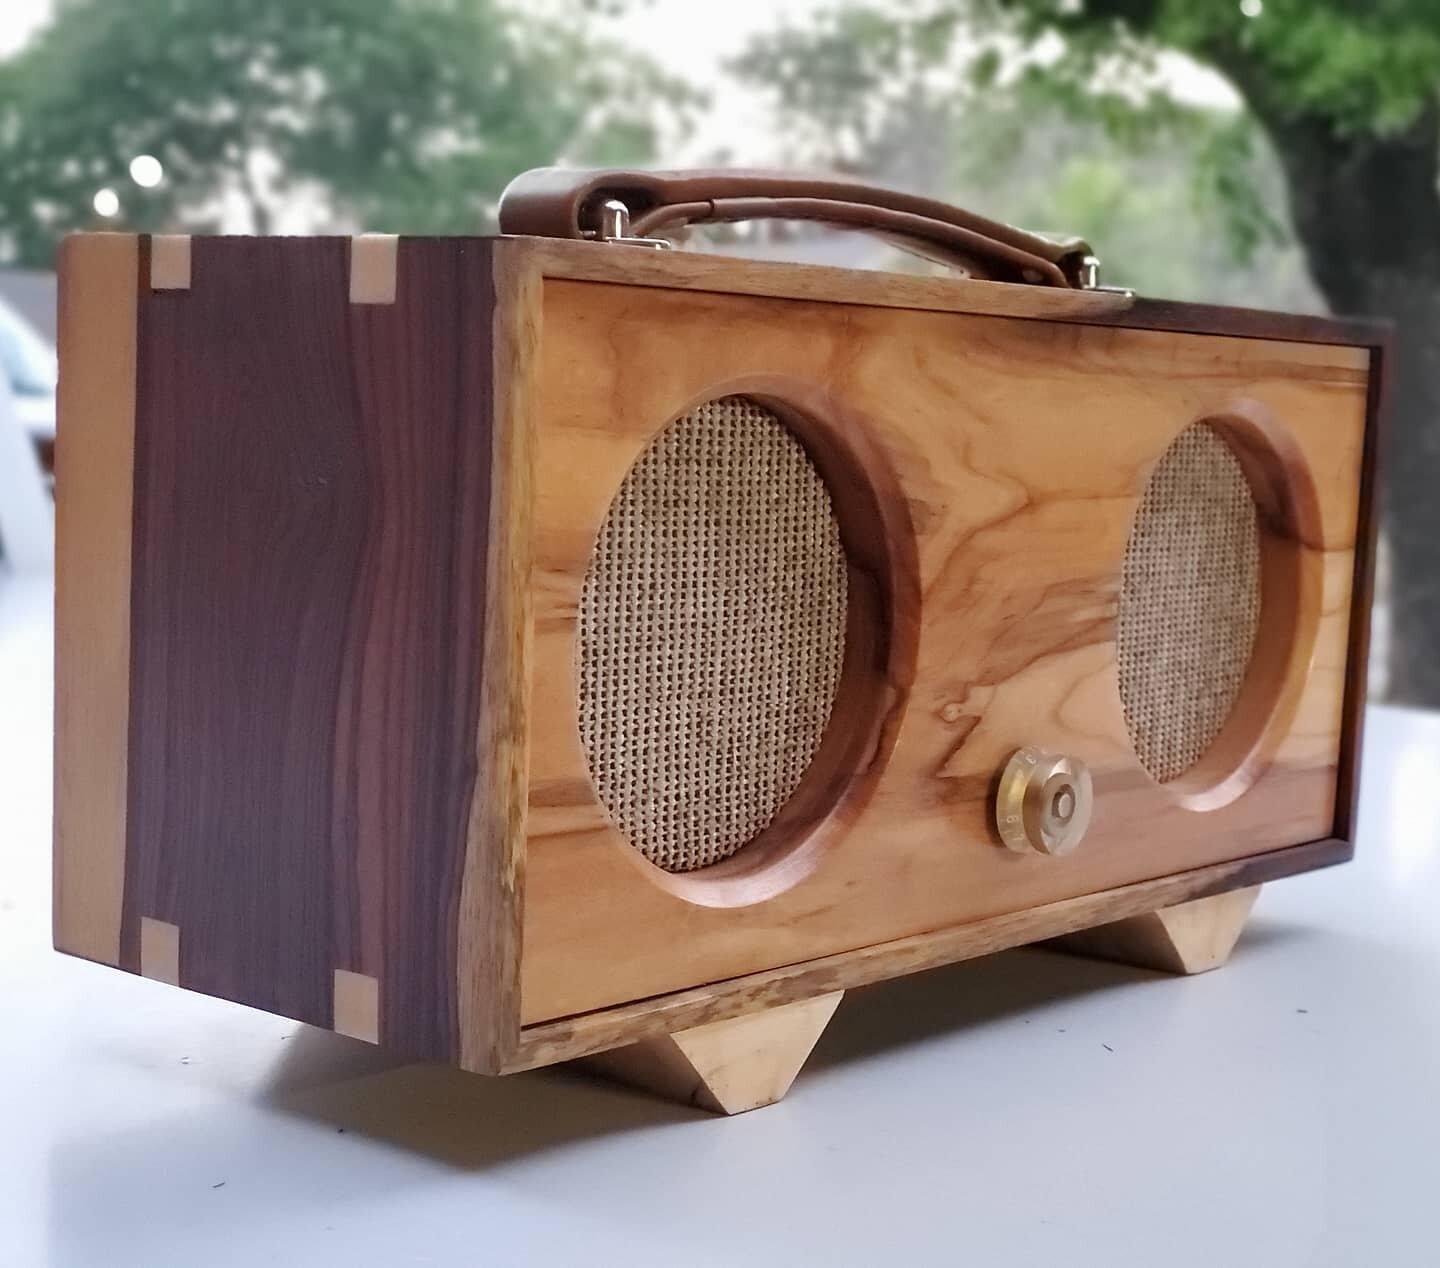 This speaker is the most expensive material wise that I have ever made. I came across some exotic Mexican Kingwood, and new exactly how I should use it. It's pretty amazing looking, and the story behind it makes it even crazier. #tinkeraudio #custom 